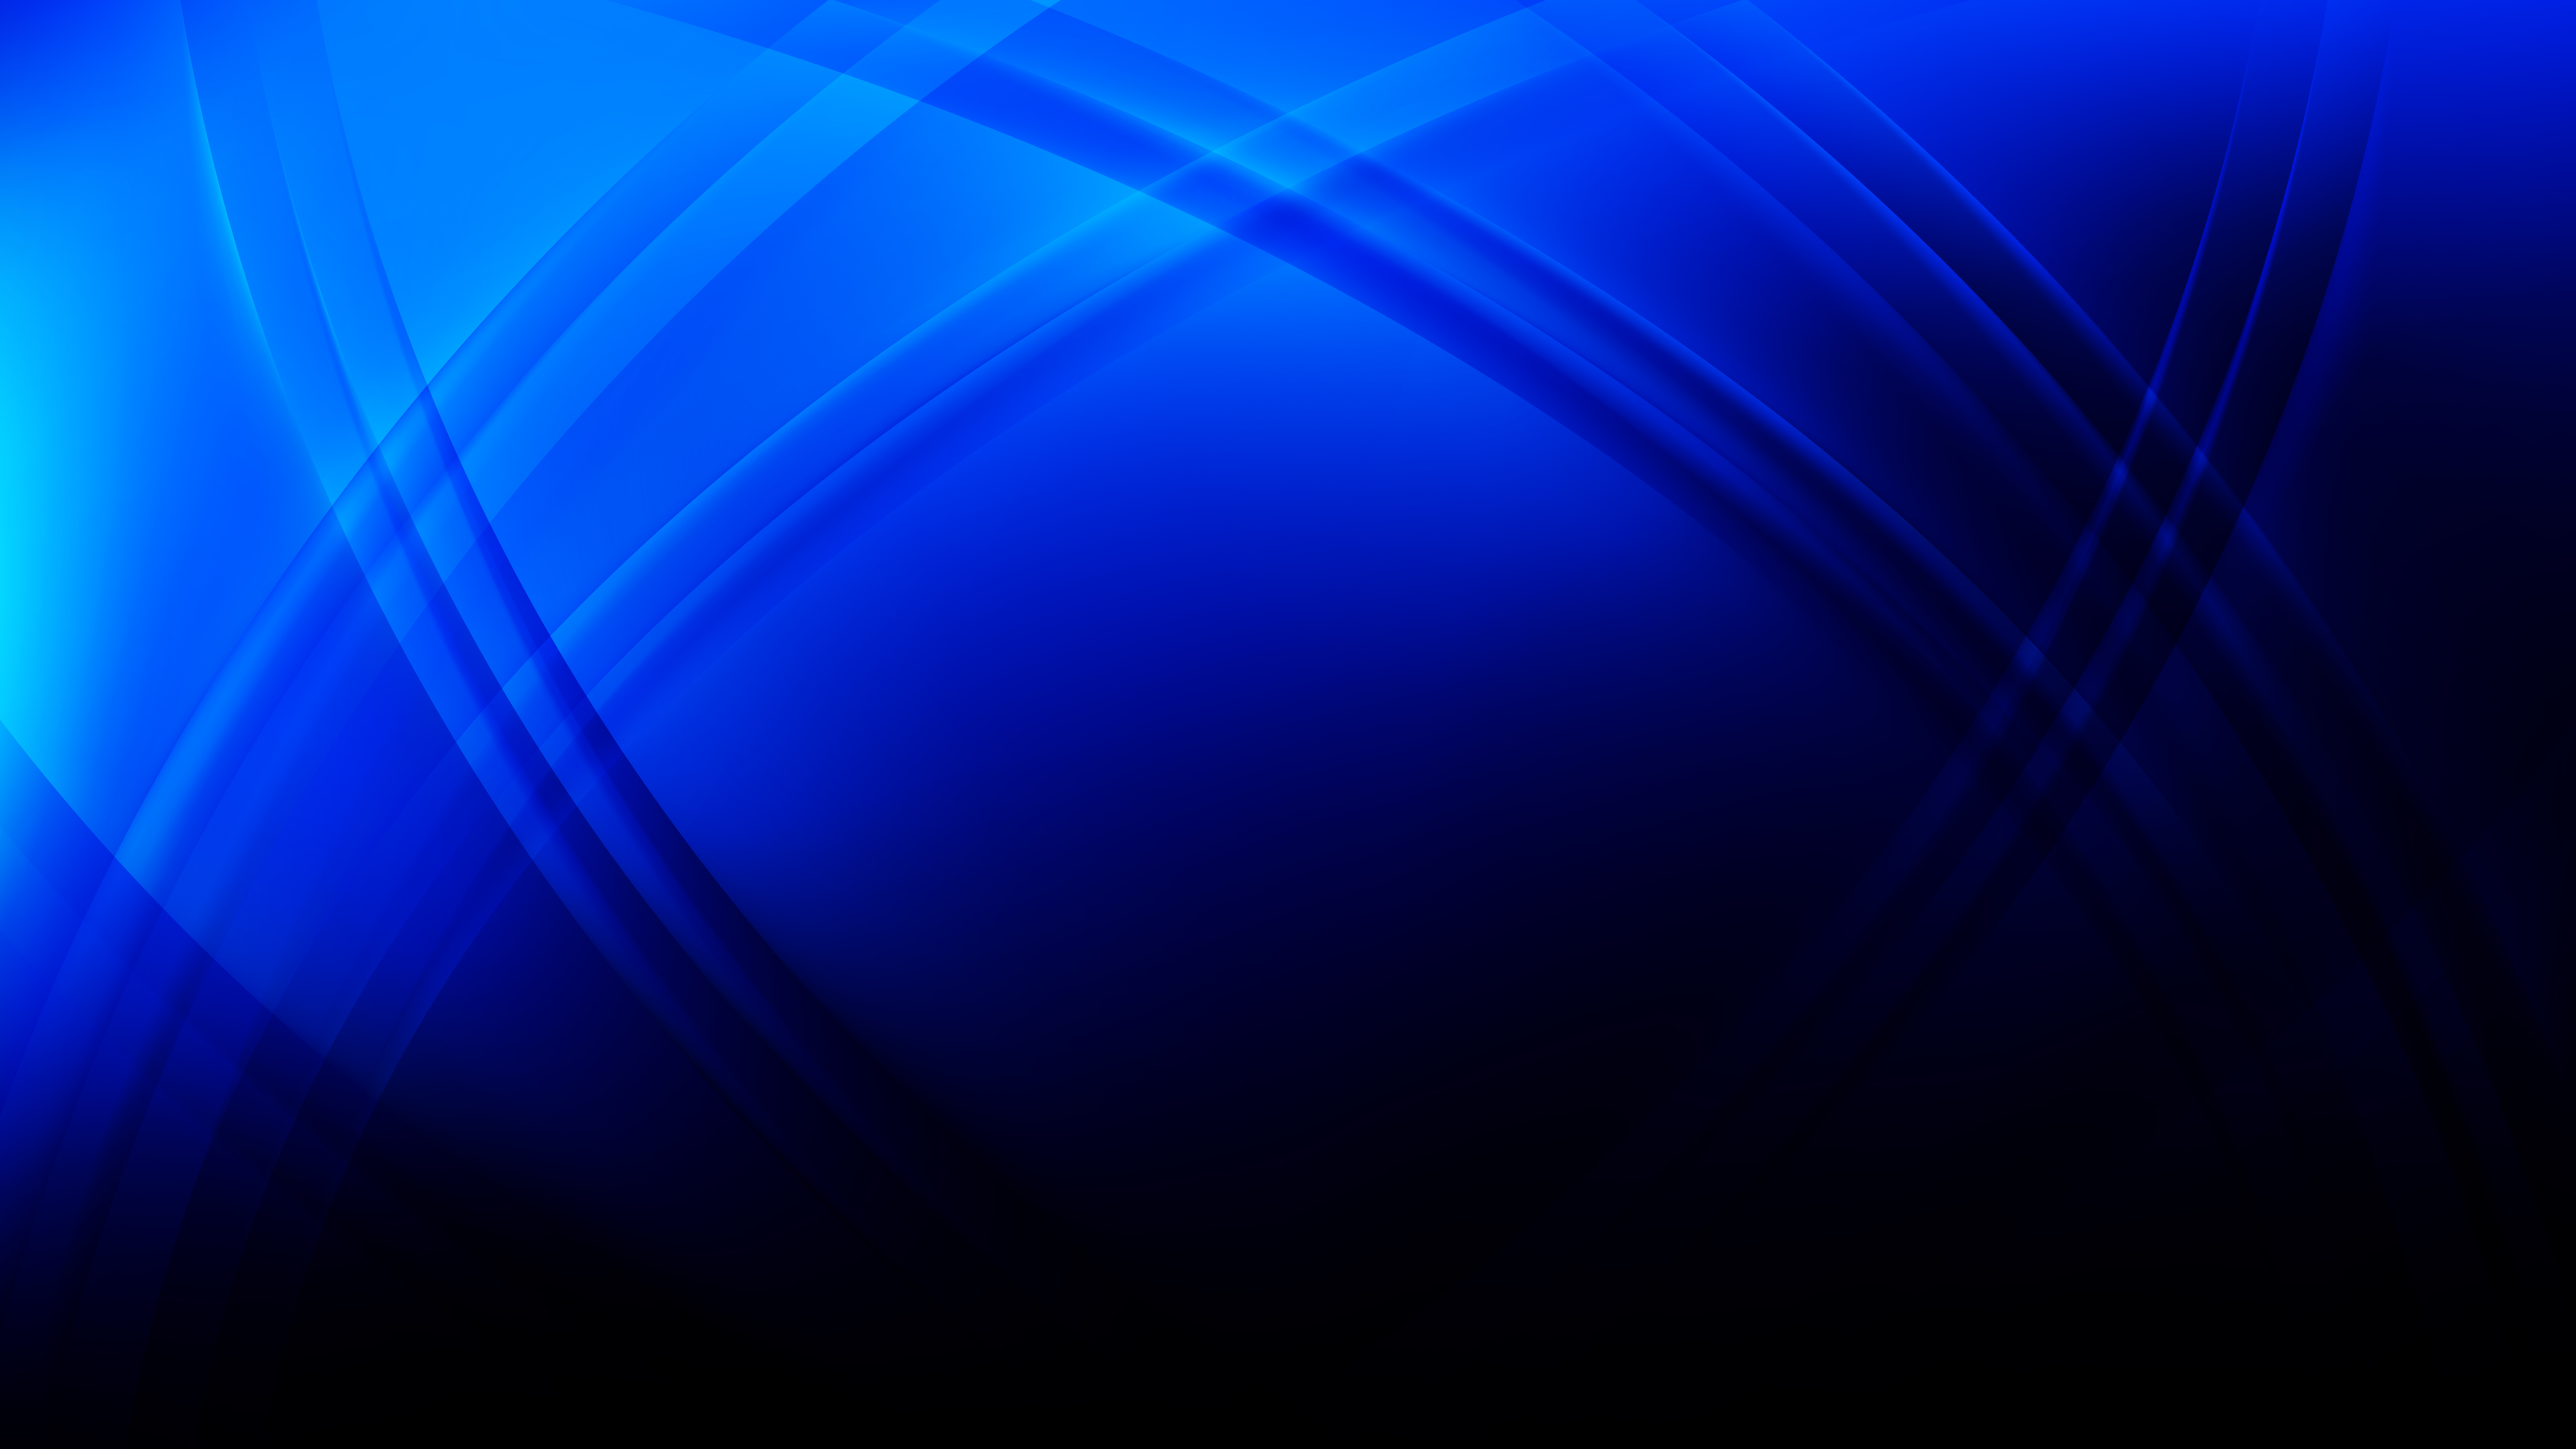 Free Cool Blue Curved Lines Background Graphic